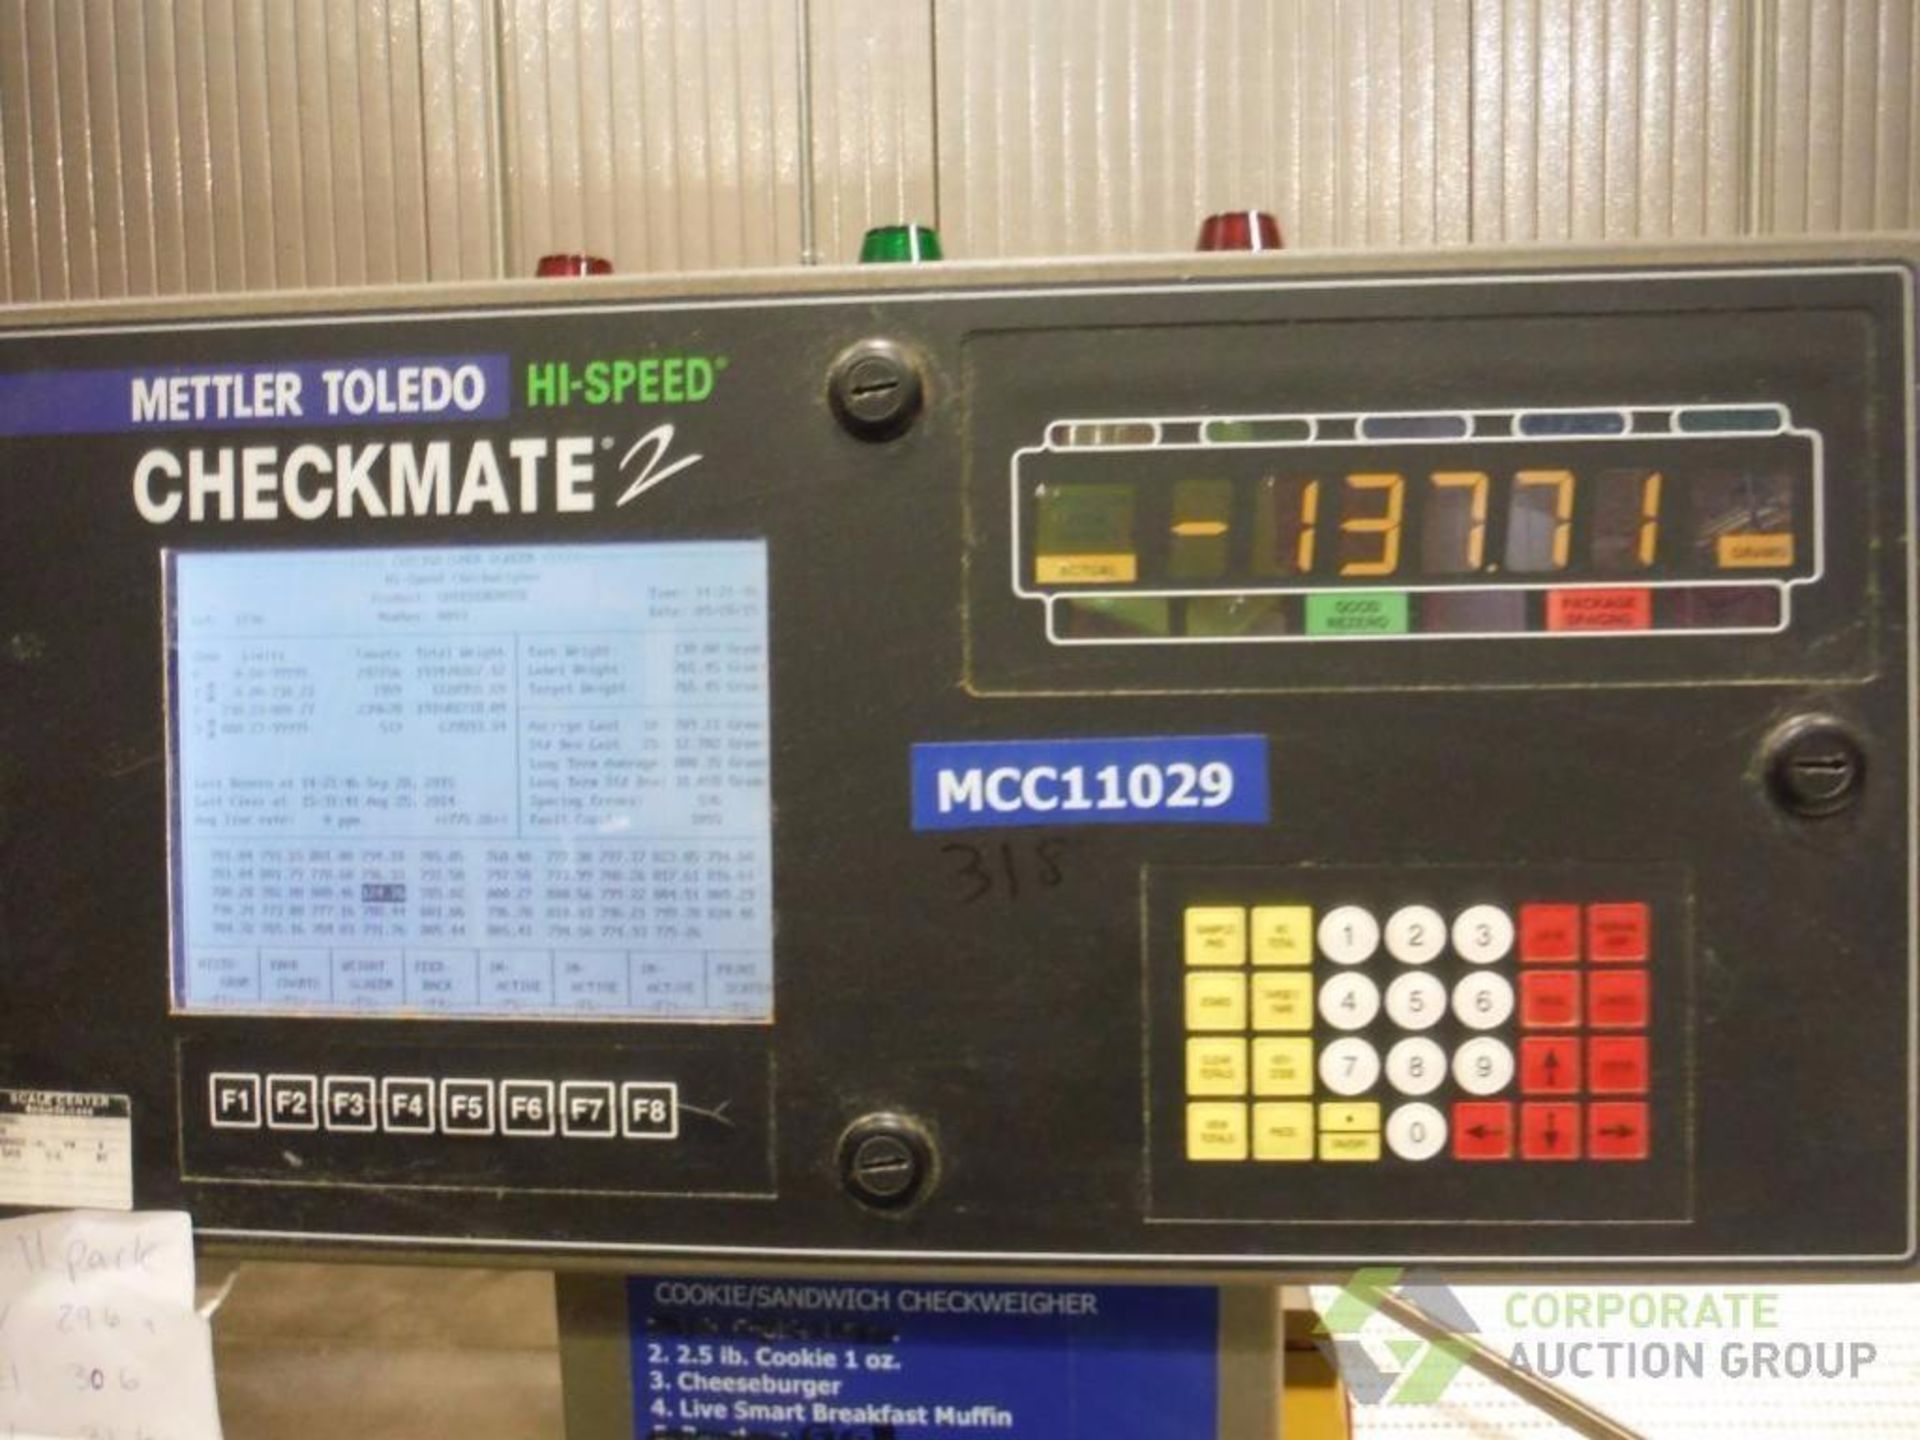 Mettler Toledo hi speed checkmate 2 checkweigher, with reject arm ** Rigging Fee: $ 150** (Located i - Image 5 of 6